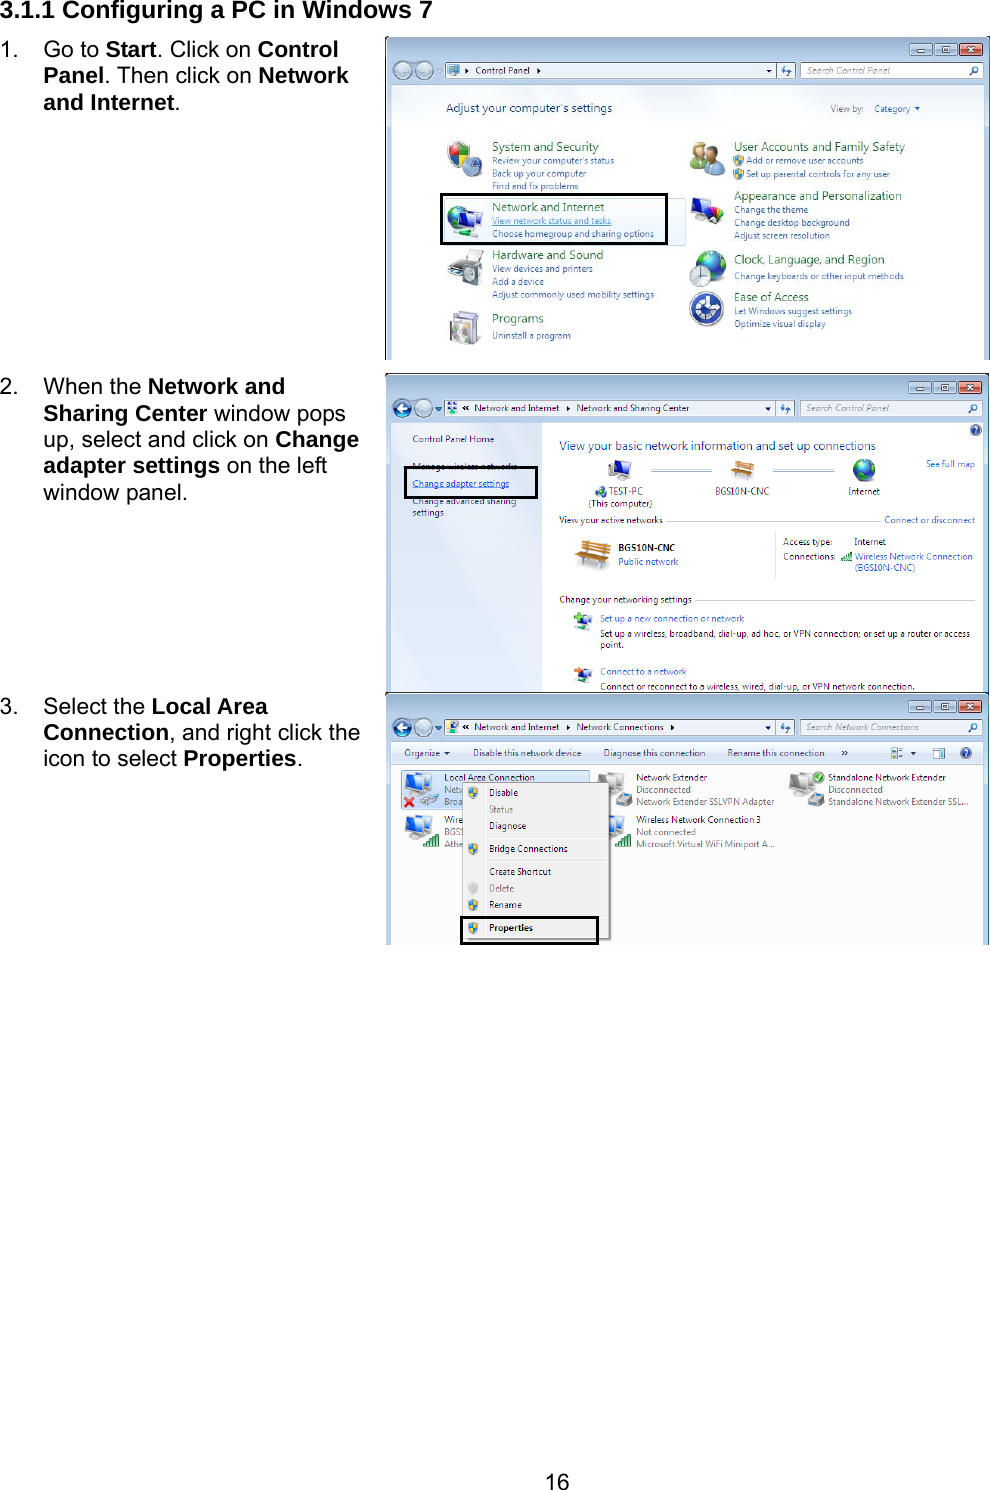 16 3.1.1 Configuring a PC in Windows 7 1. Go to Start. Click on Control Panel. Then click on Network and Internet. 2. When the Network and Sharing Center window pops up, select and click on Change adapter settings on the left window panel. 3. Select the Local Area Connection, and right click the icon to select Properties.  